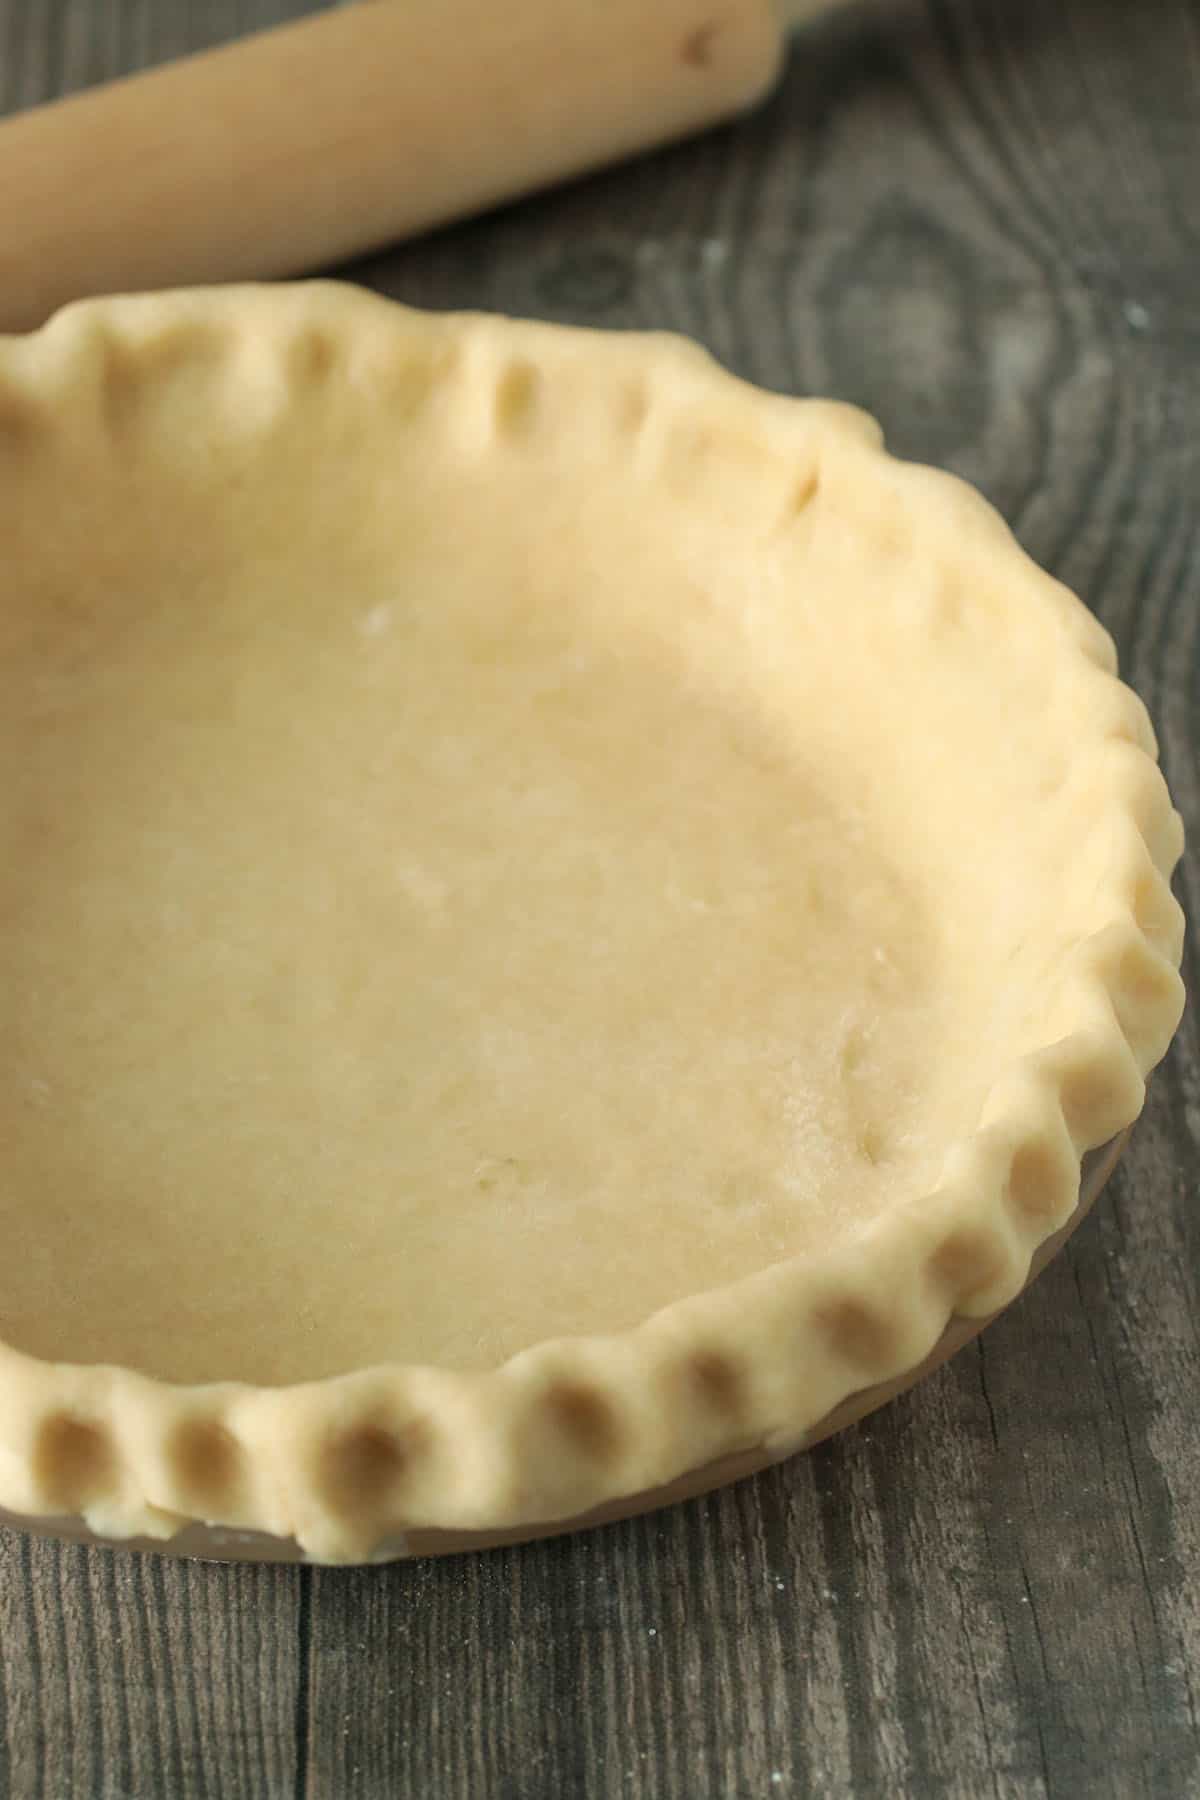 The shaped pie shell.